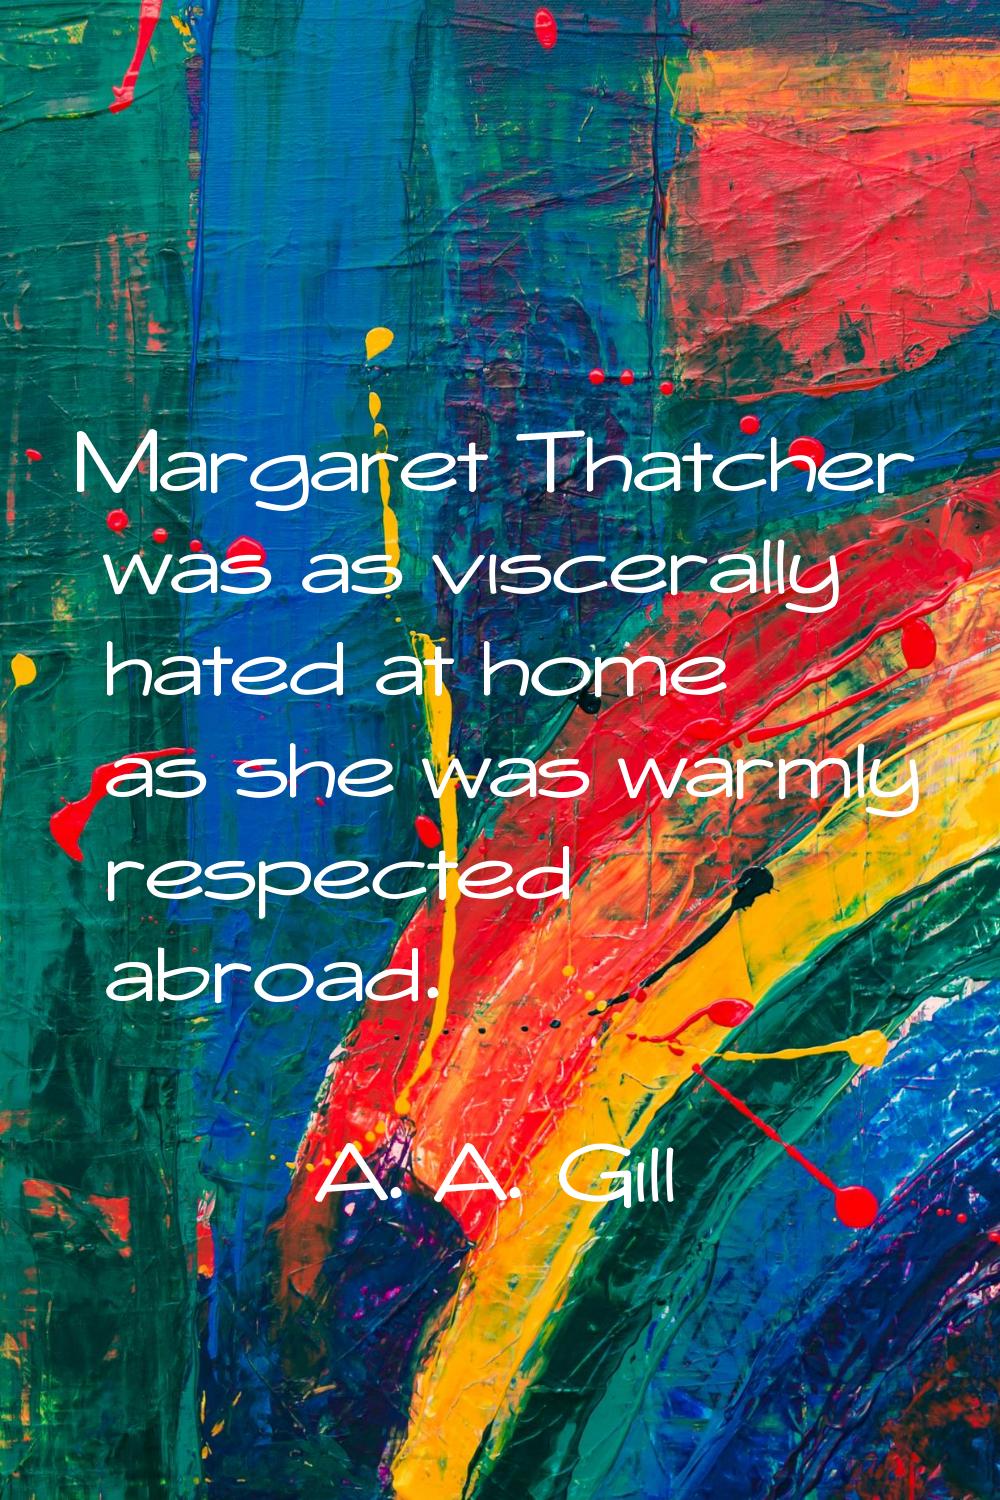 Margaret Thatcher was as viscerally hated at home as she was warmly respected abroad.